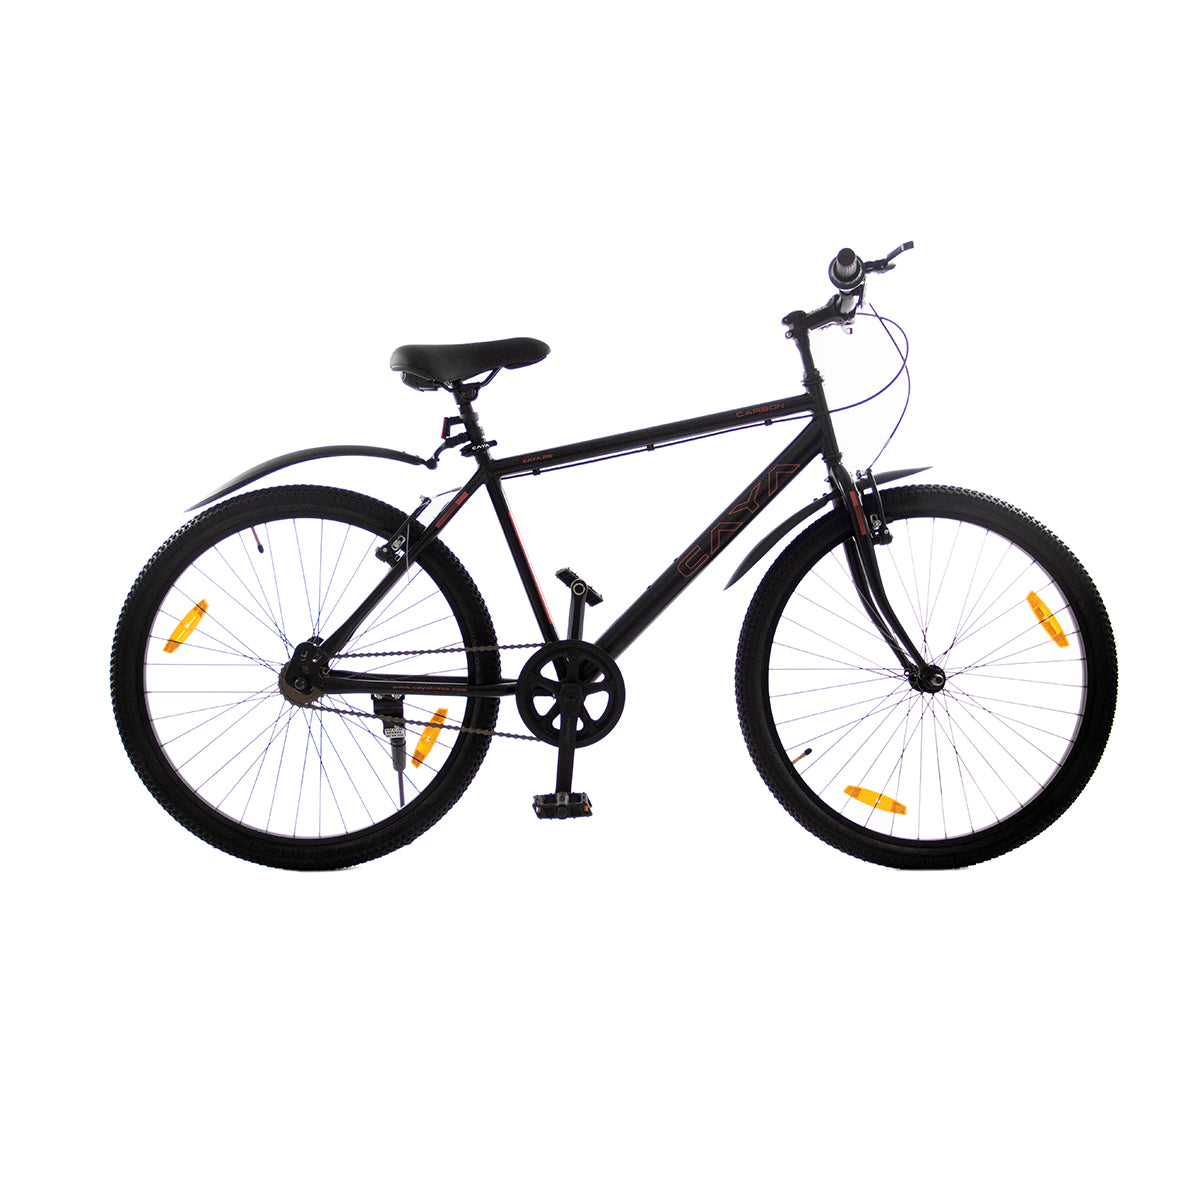 CAYA Carbon 26 Single Speed Cycle